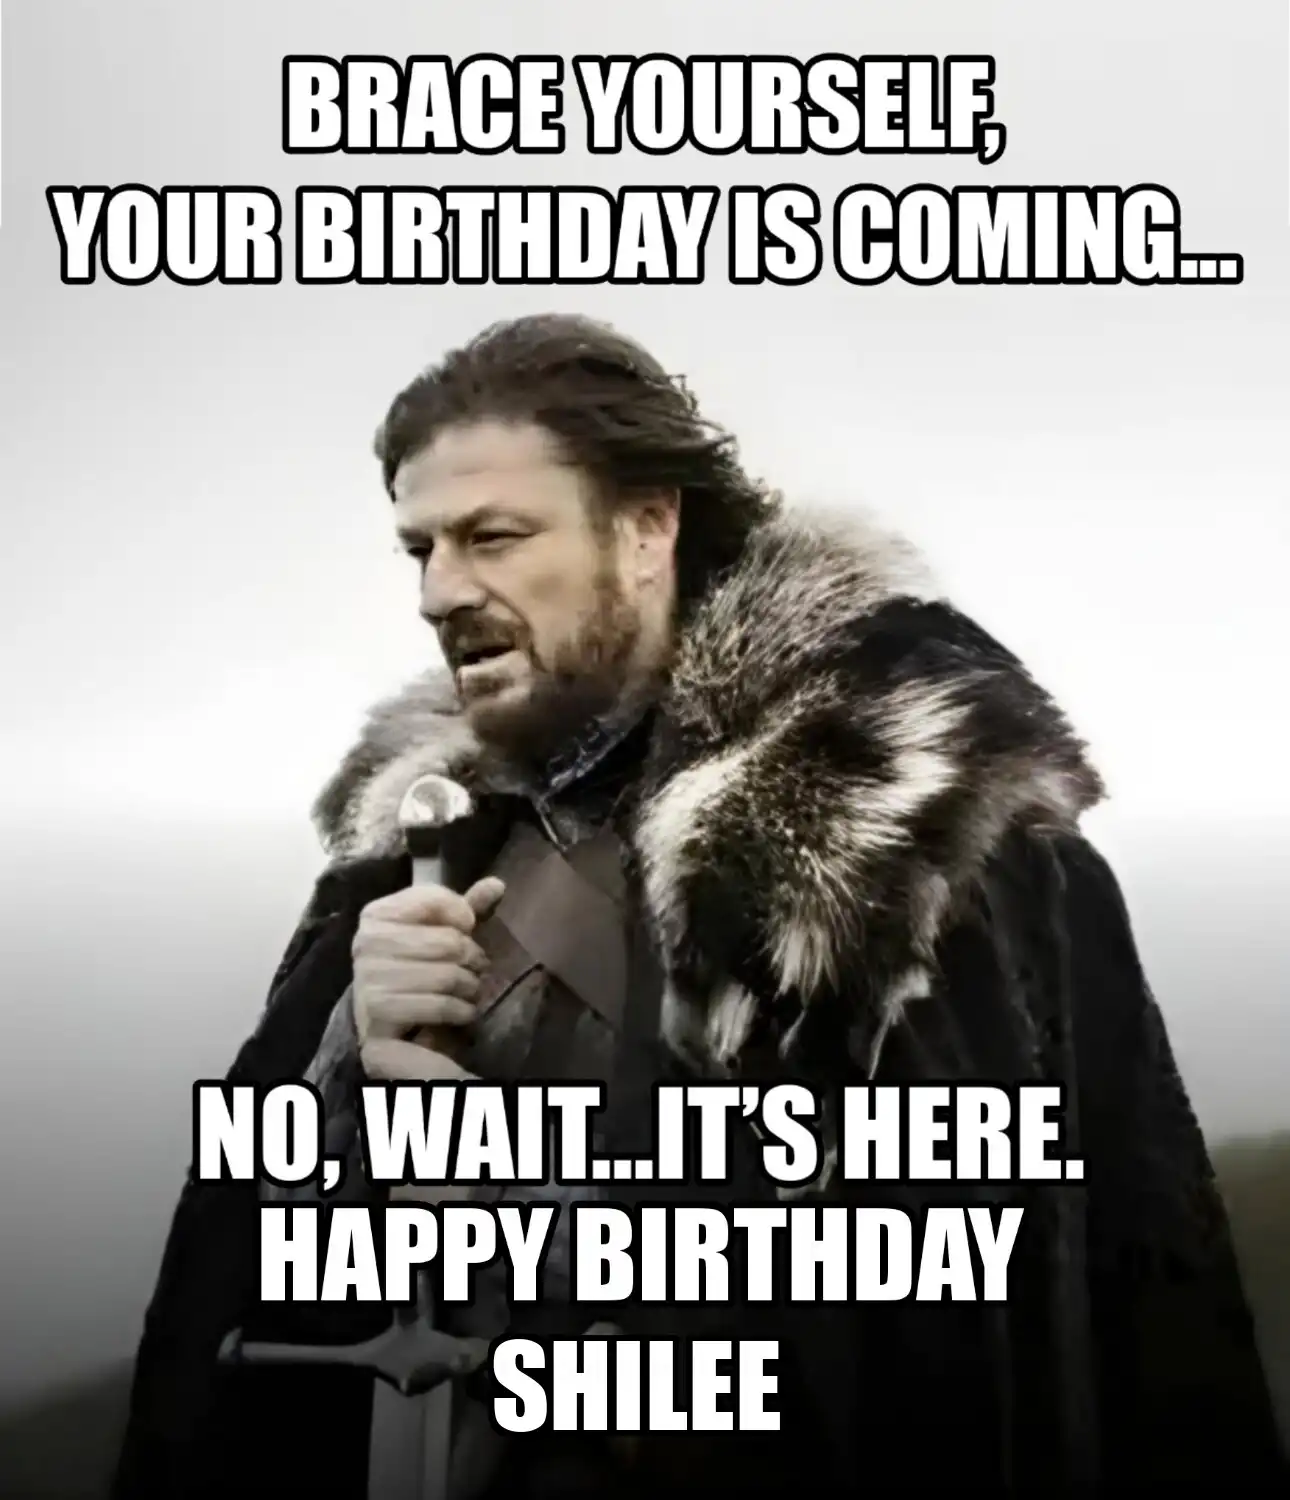 Happy Birthday Shilee Brace Yourself Your Birthday Is Coming Meme